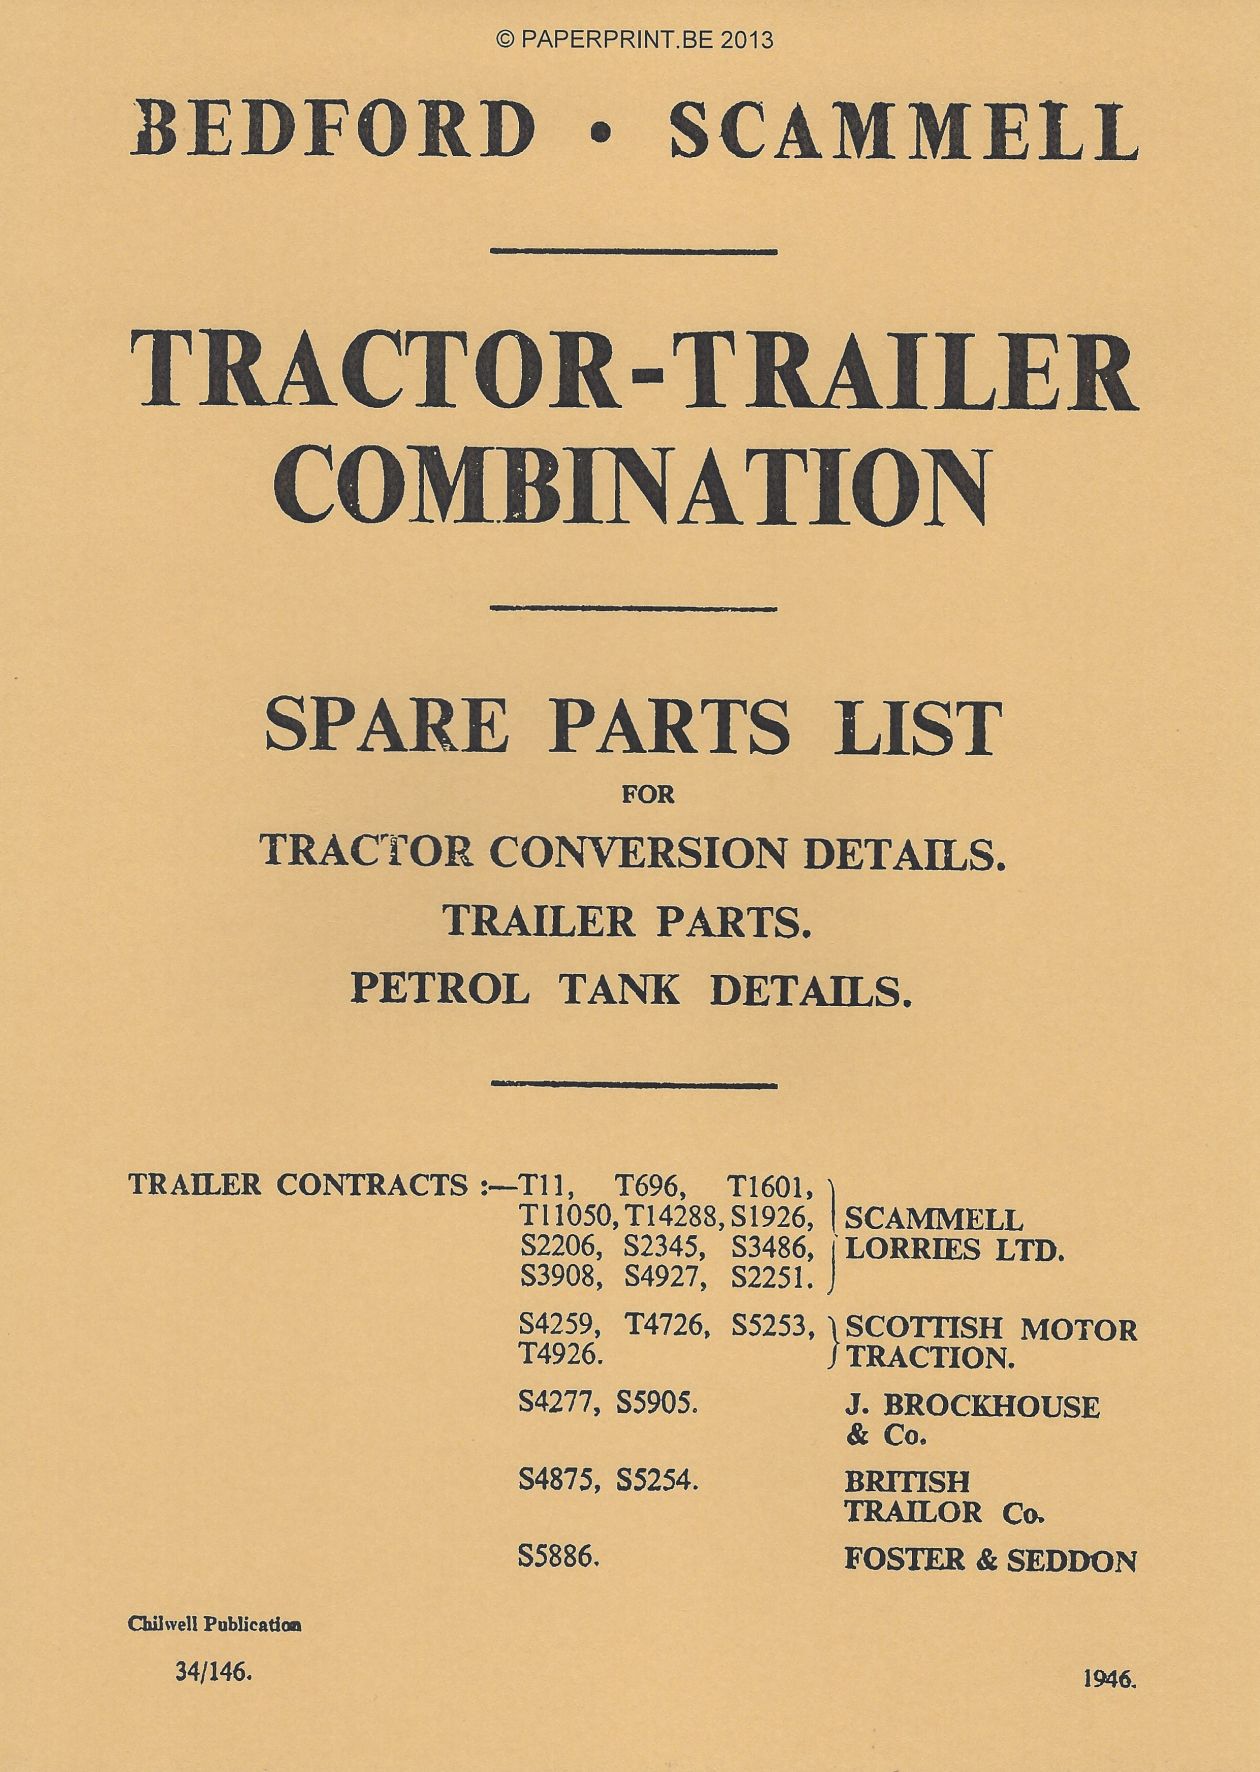 BEDFORD-SCAMMELL TRACTOR-TRAILER COMBINATION SPARE PARTS LIST